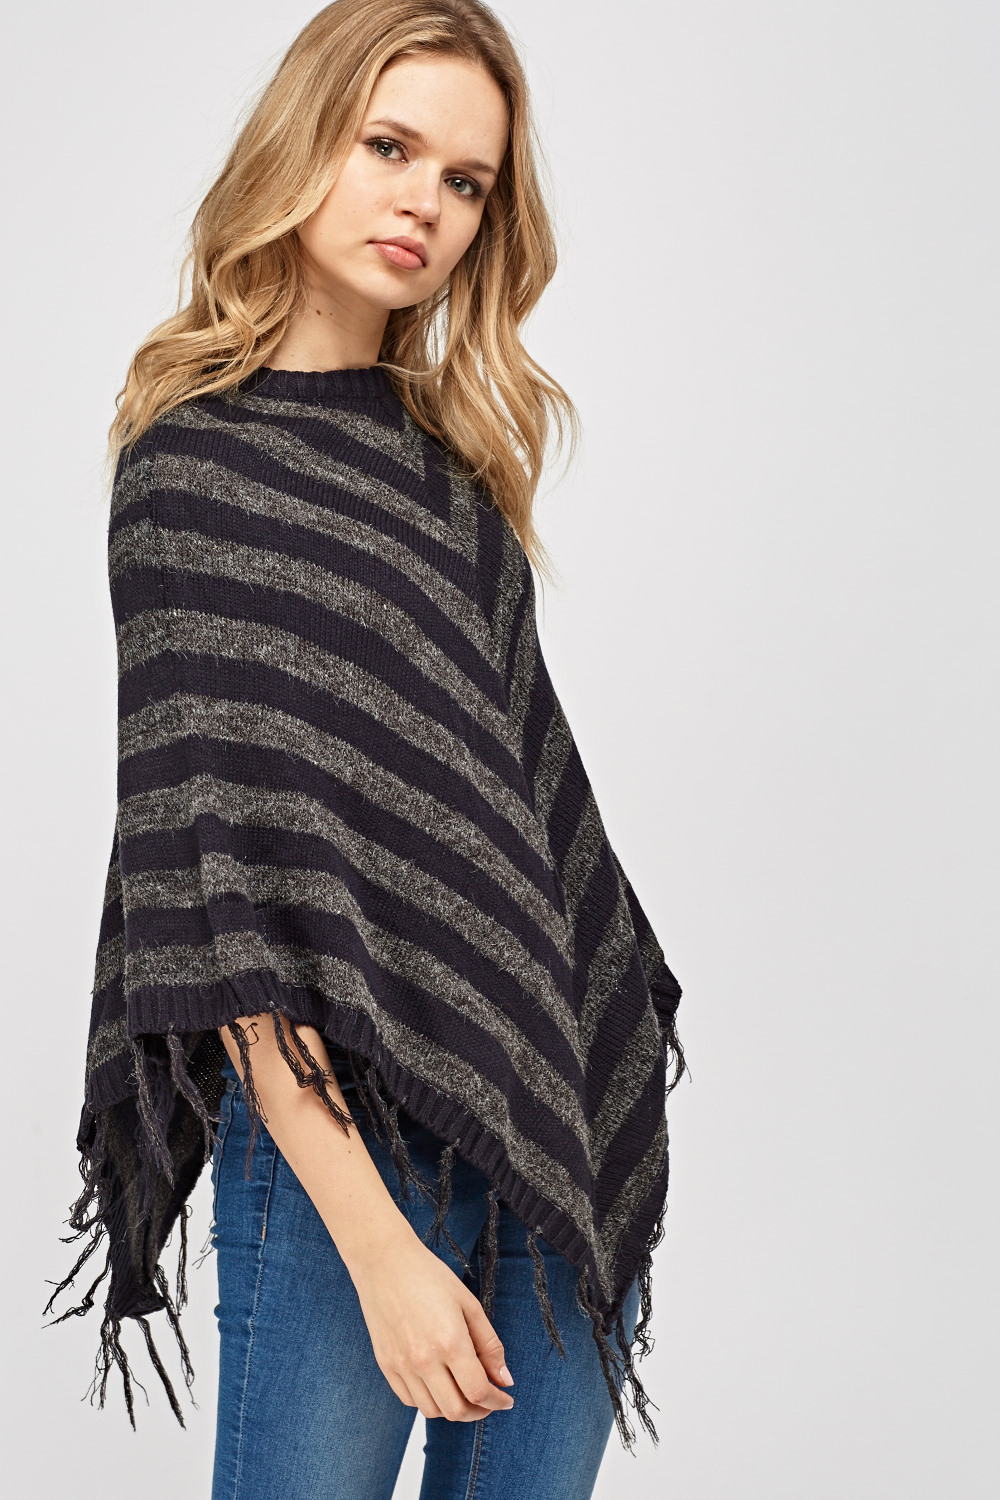 Fringed Striped Poncho - Just $6